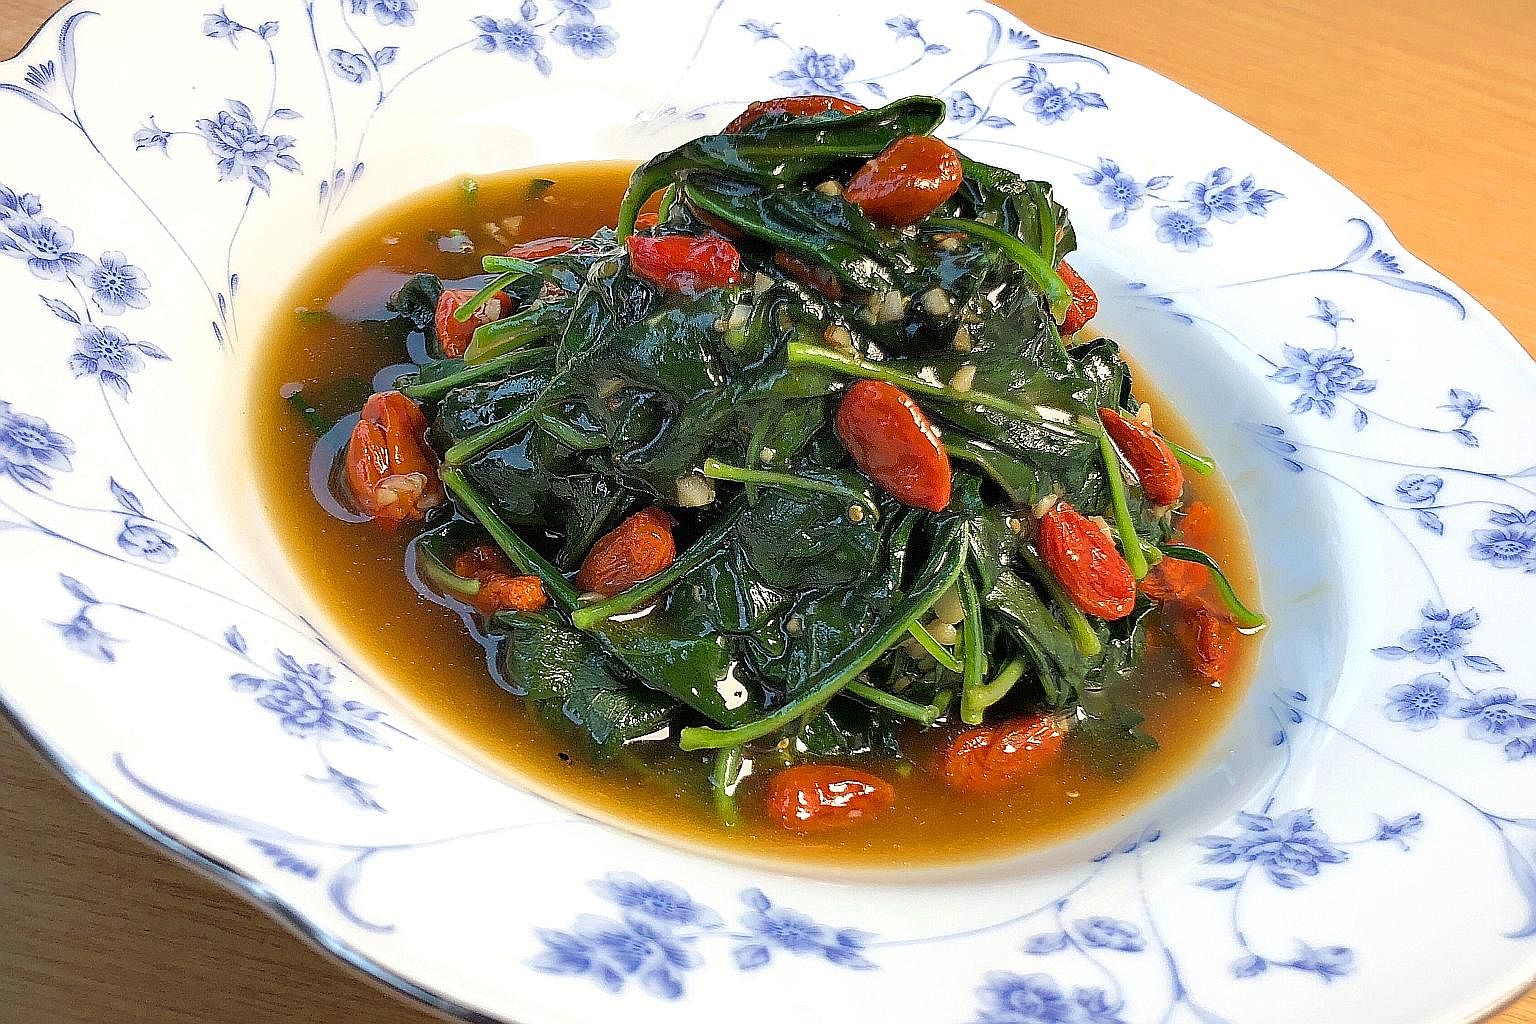 Stir-fried wolfberry leaves with wolfberries, seasoned with oyster sauce.